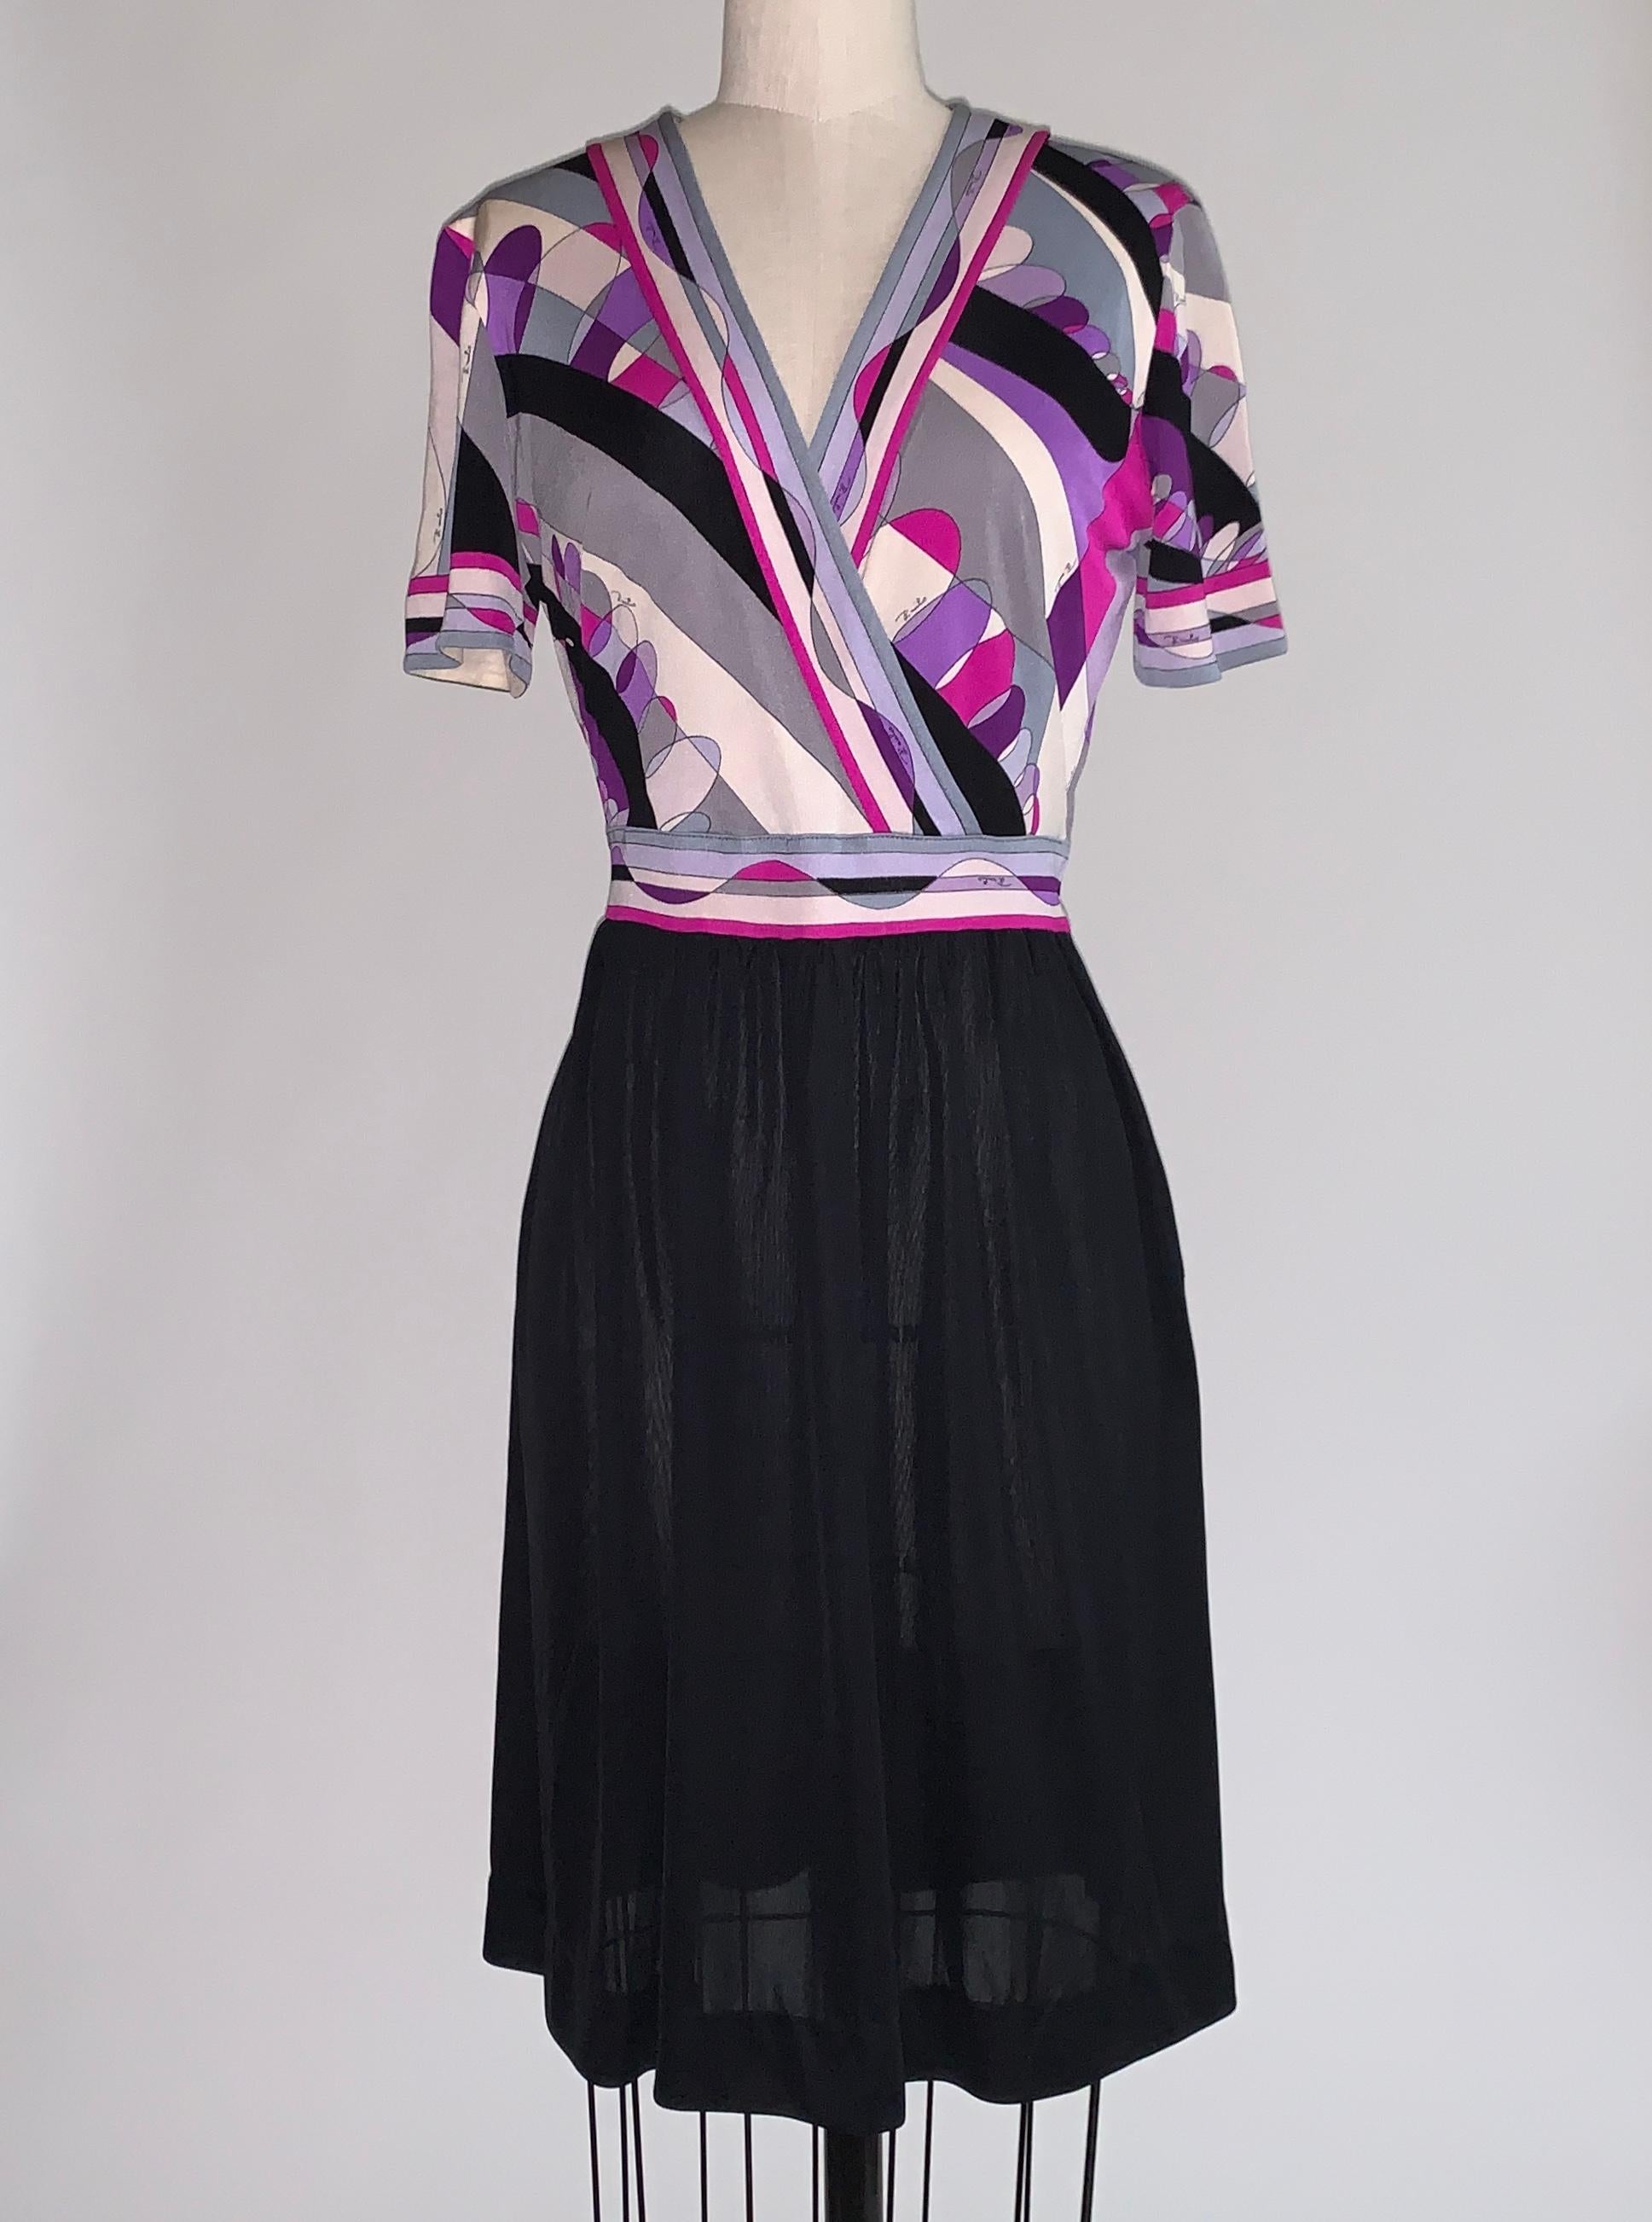 Vintage Pucci 1960s lightweight silk dress with black skirt and Pucci print bodice with short sleeves and v-neck. Grey, cream, purple and fuchsia print signed 